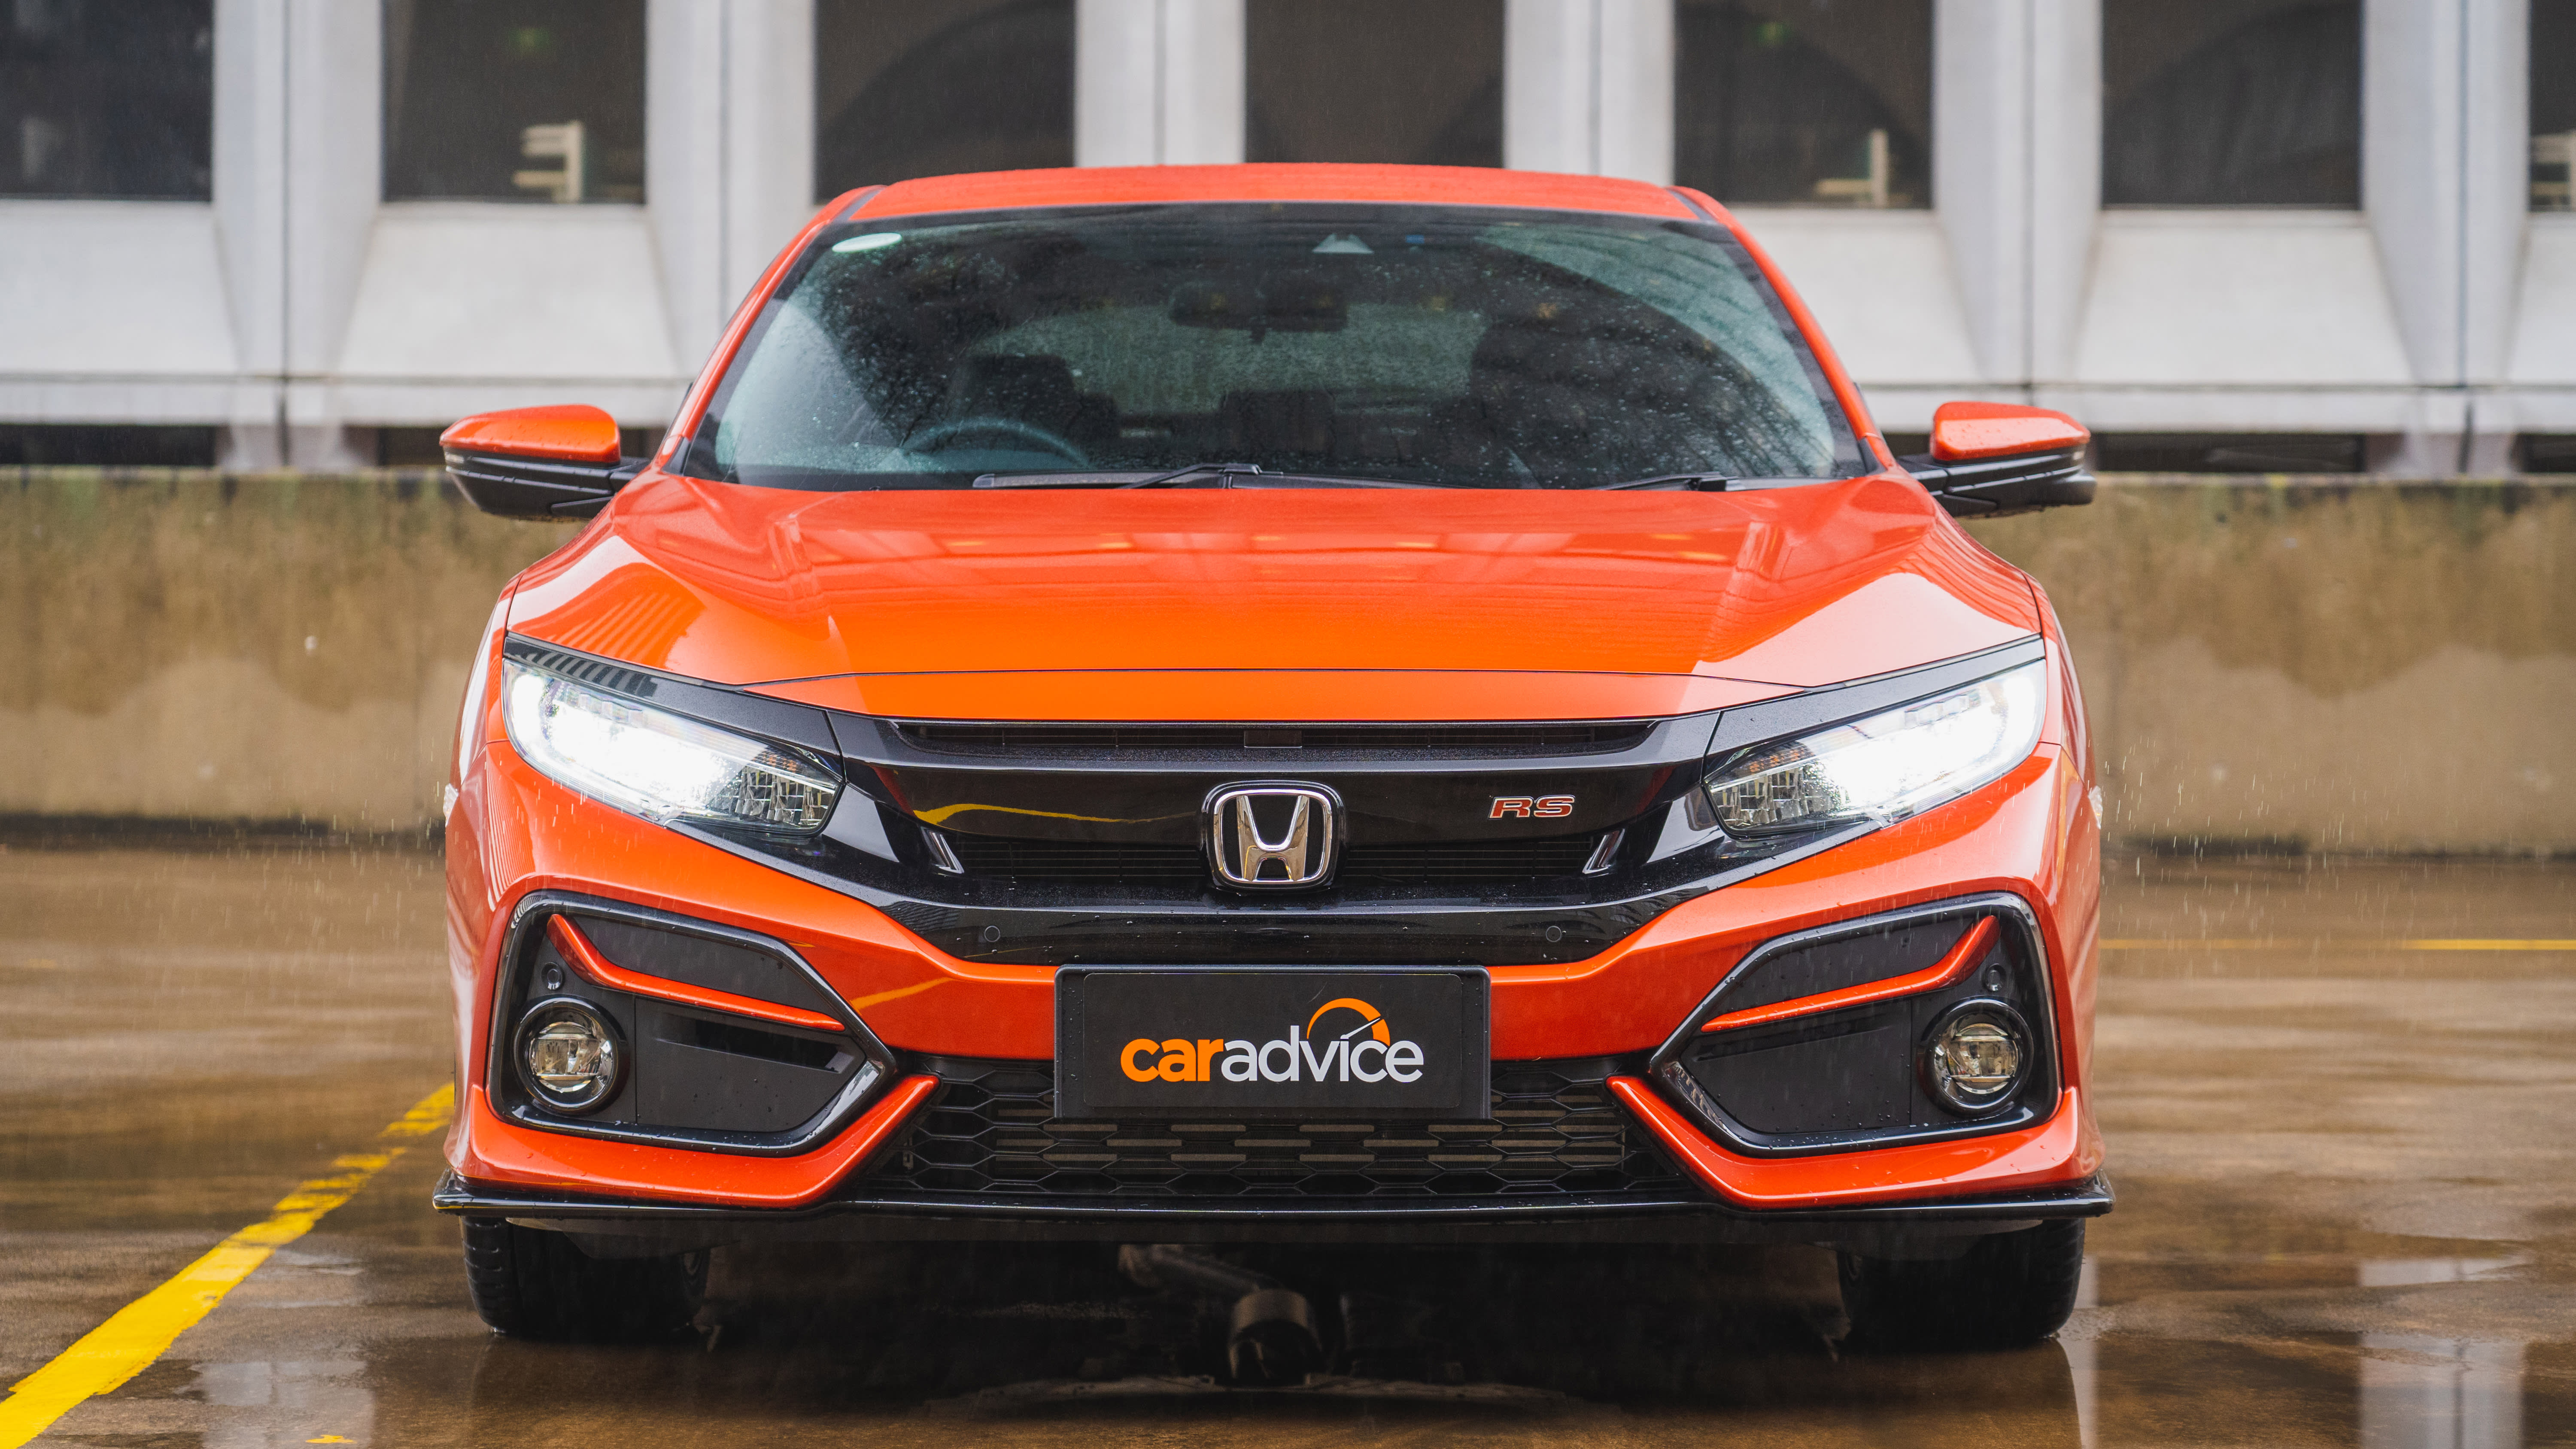 Honda Civic Rs Hatch Review Caradvice